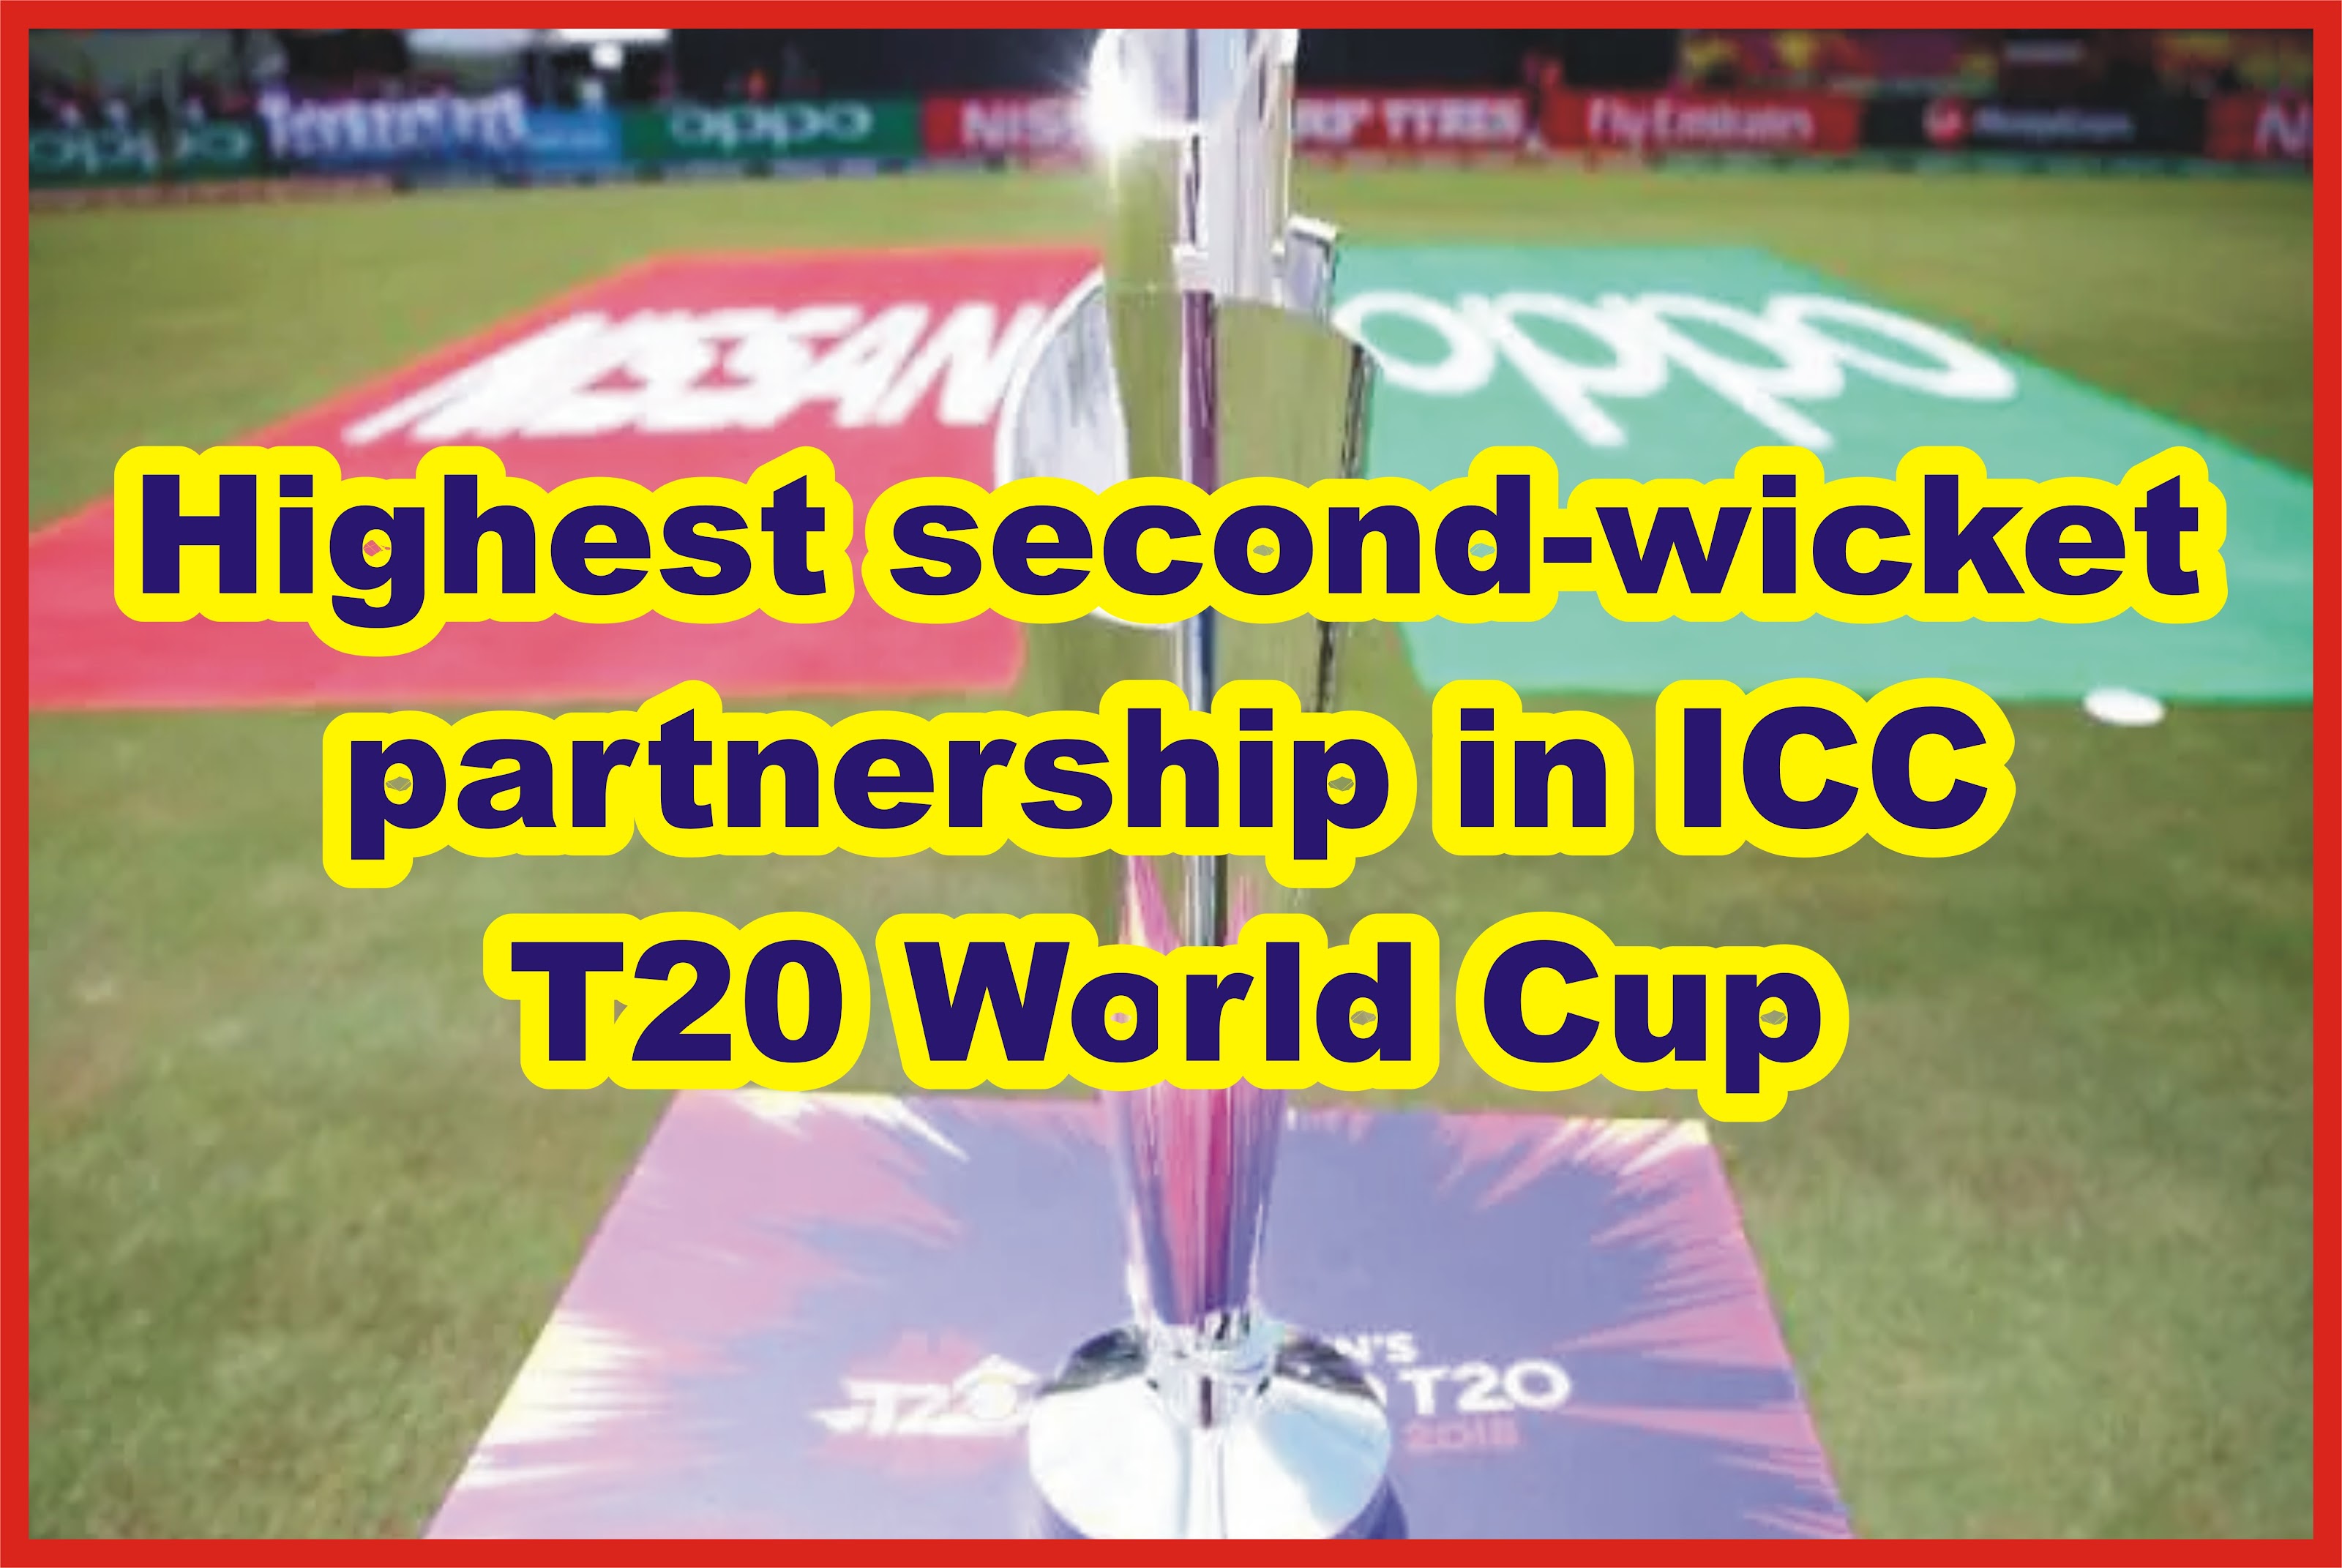 Highest second-wicket partnership in ICC T20 World Cup